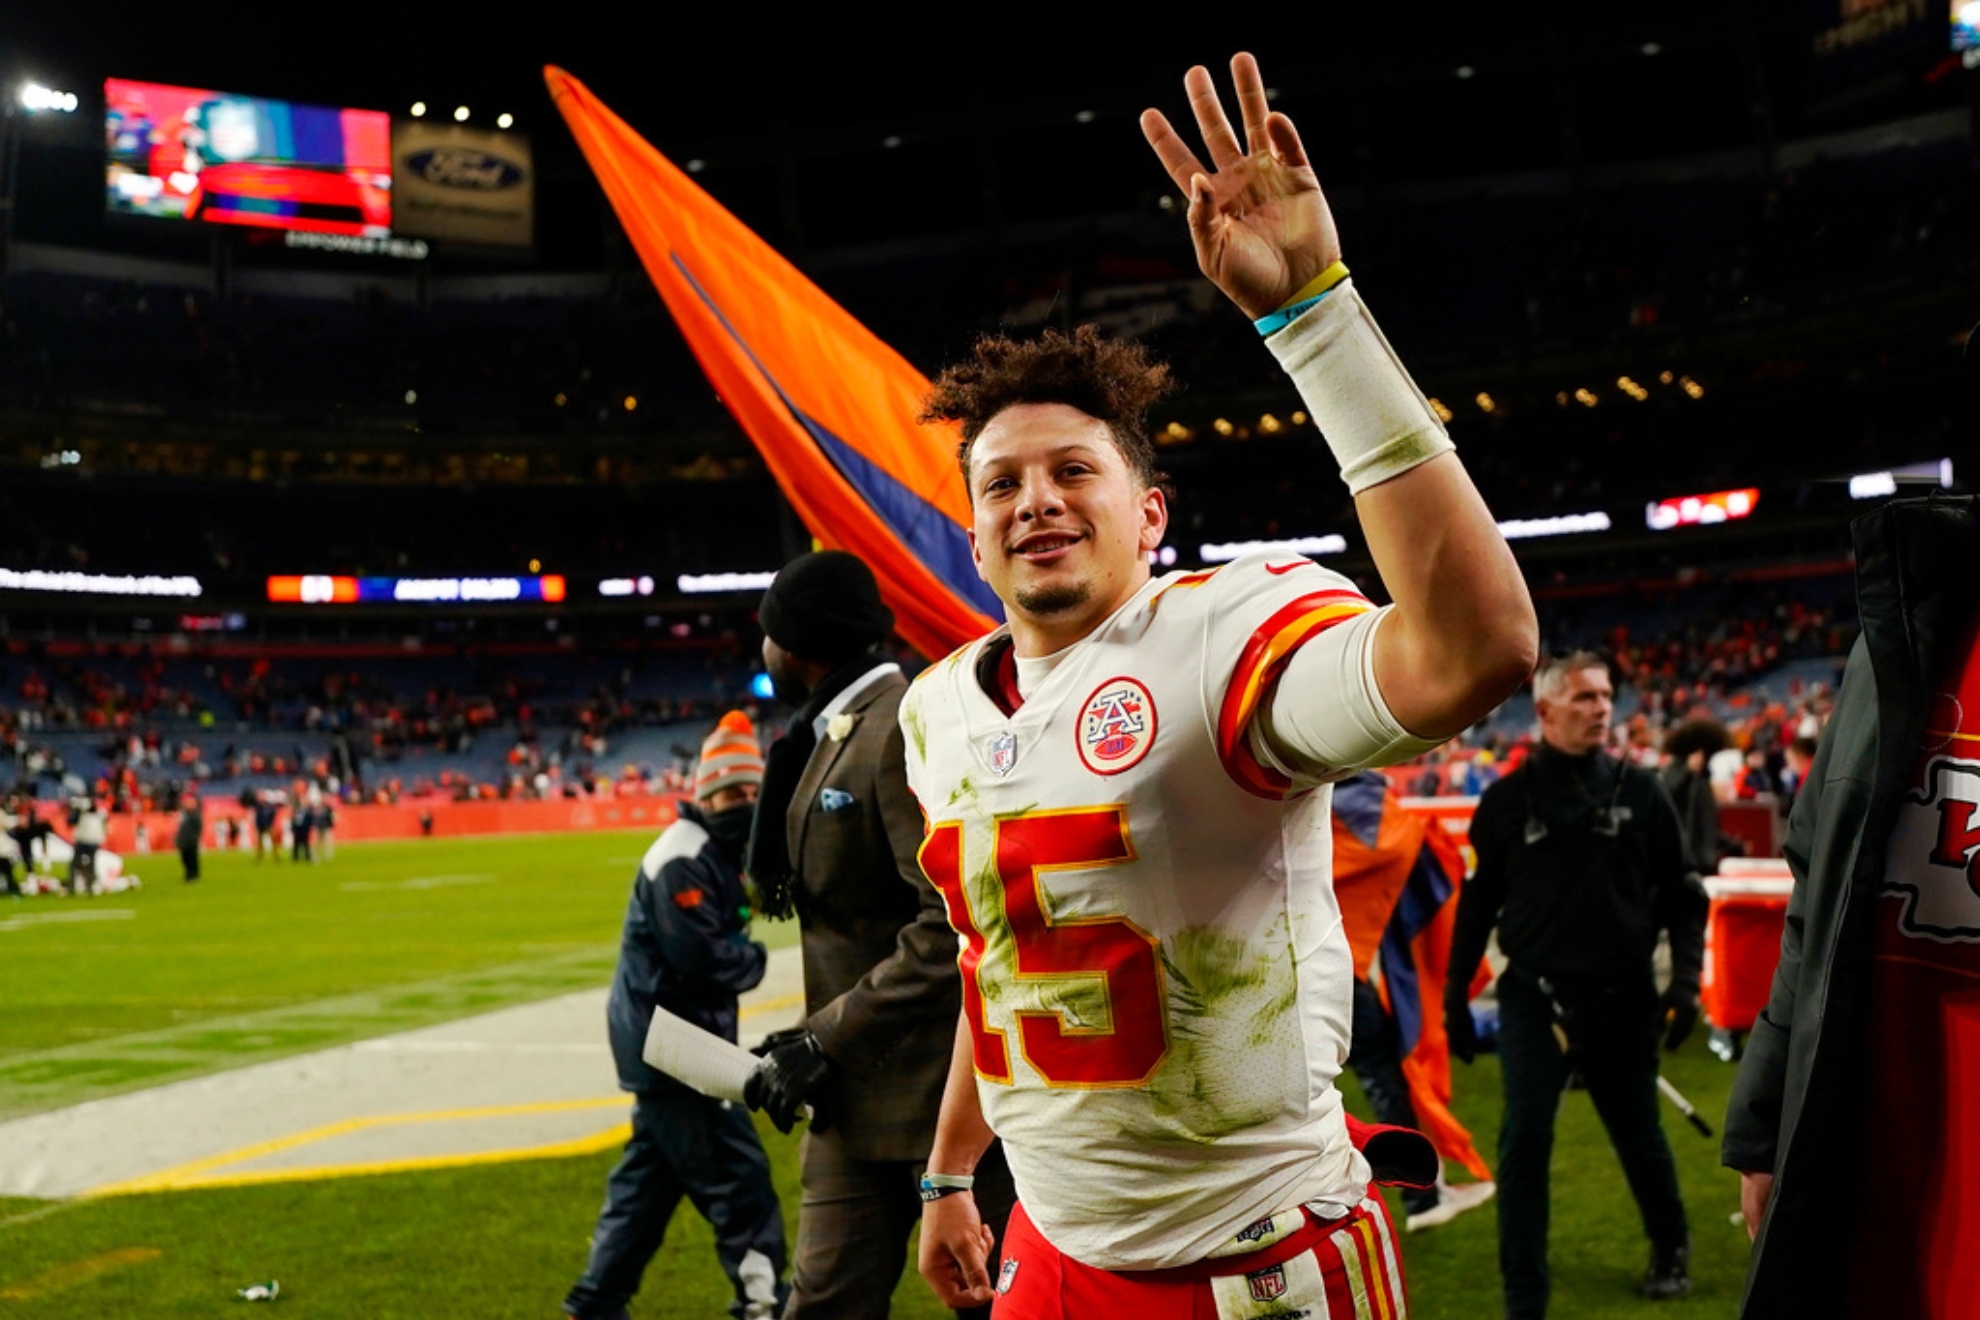 Lions vs. Chiefs Week 1: Best prop bets and picks for Thursday